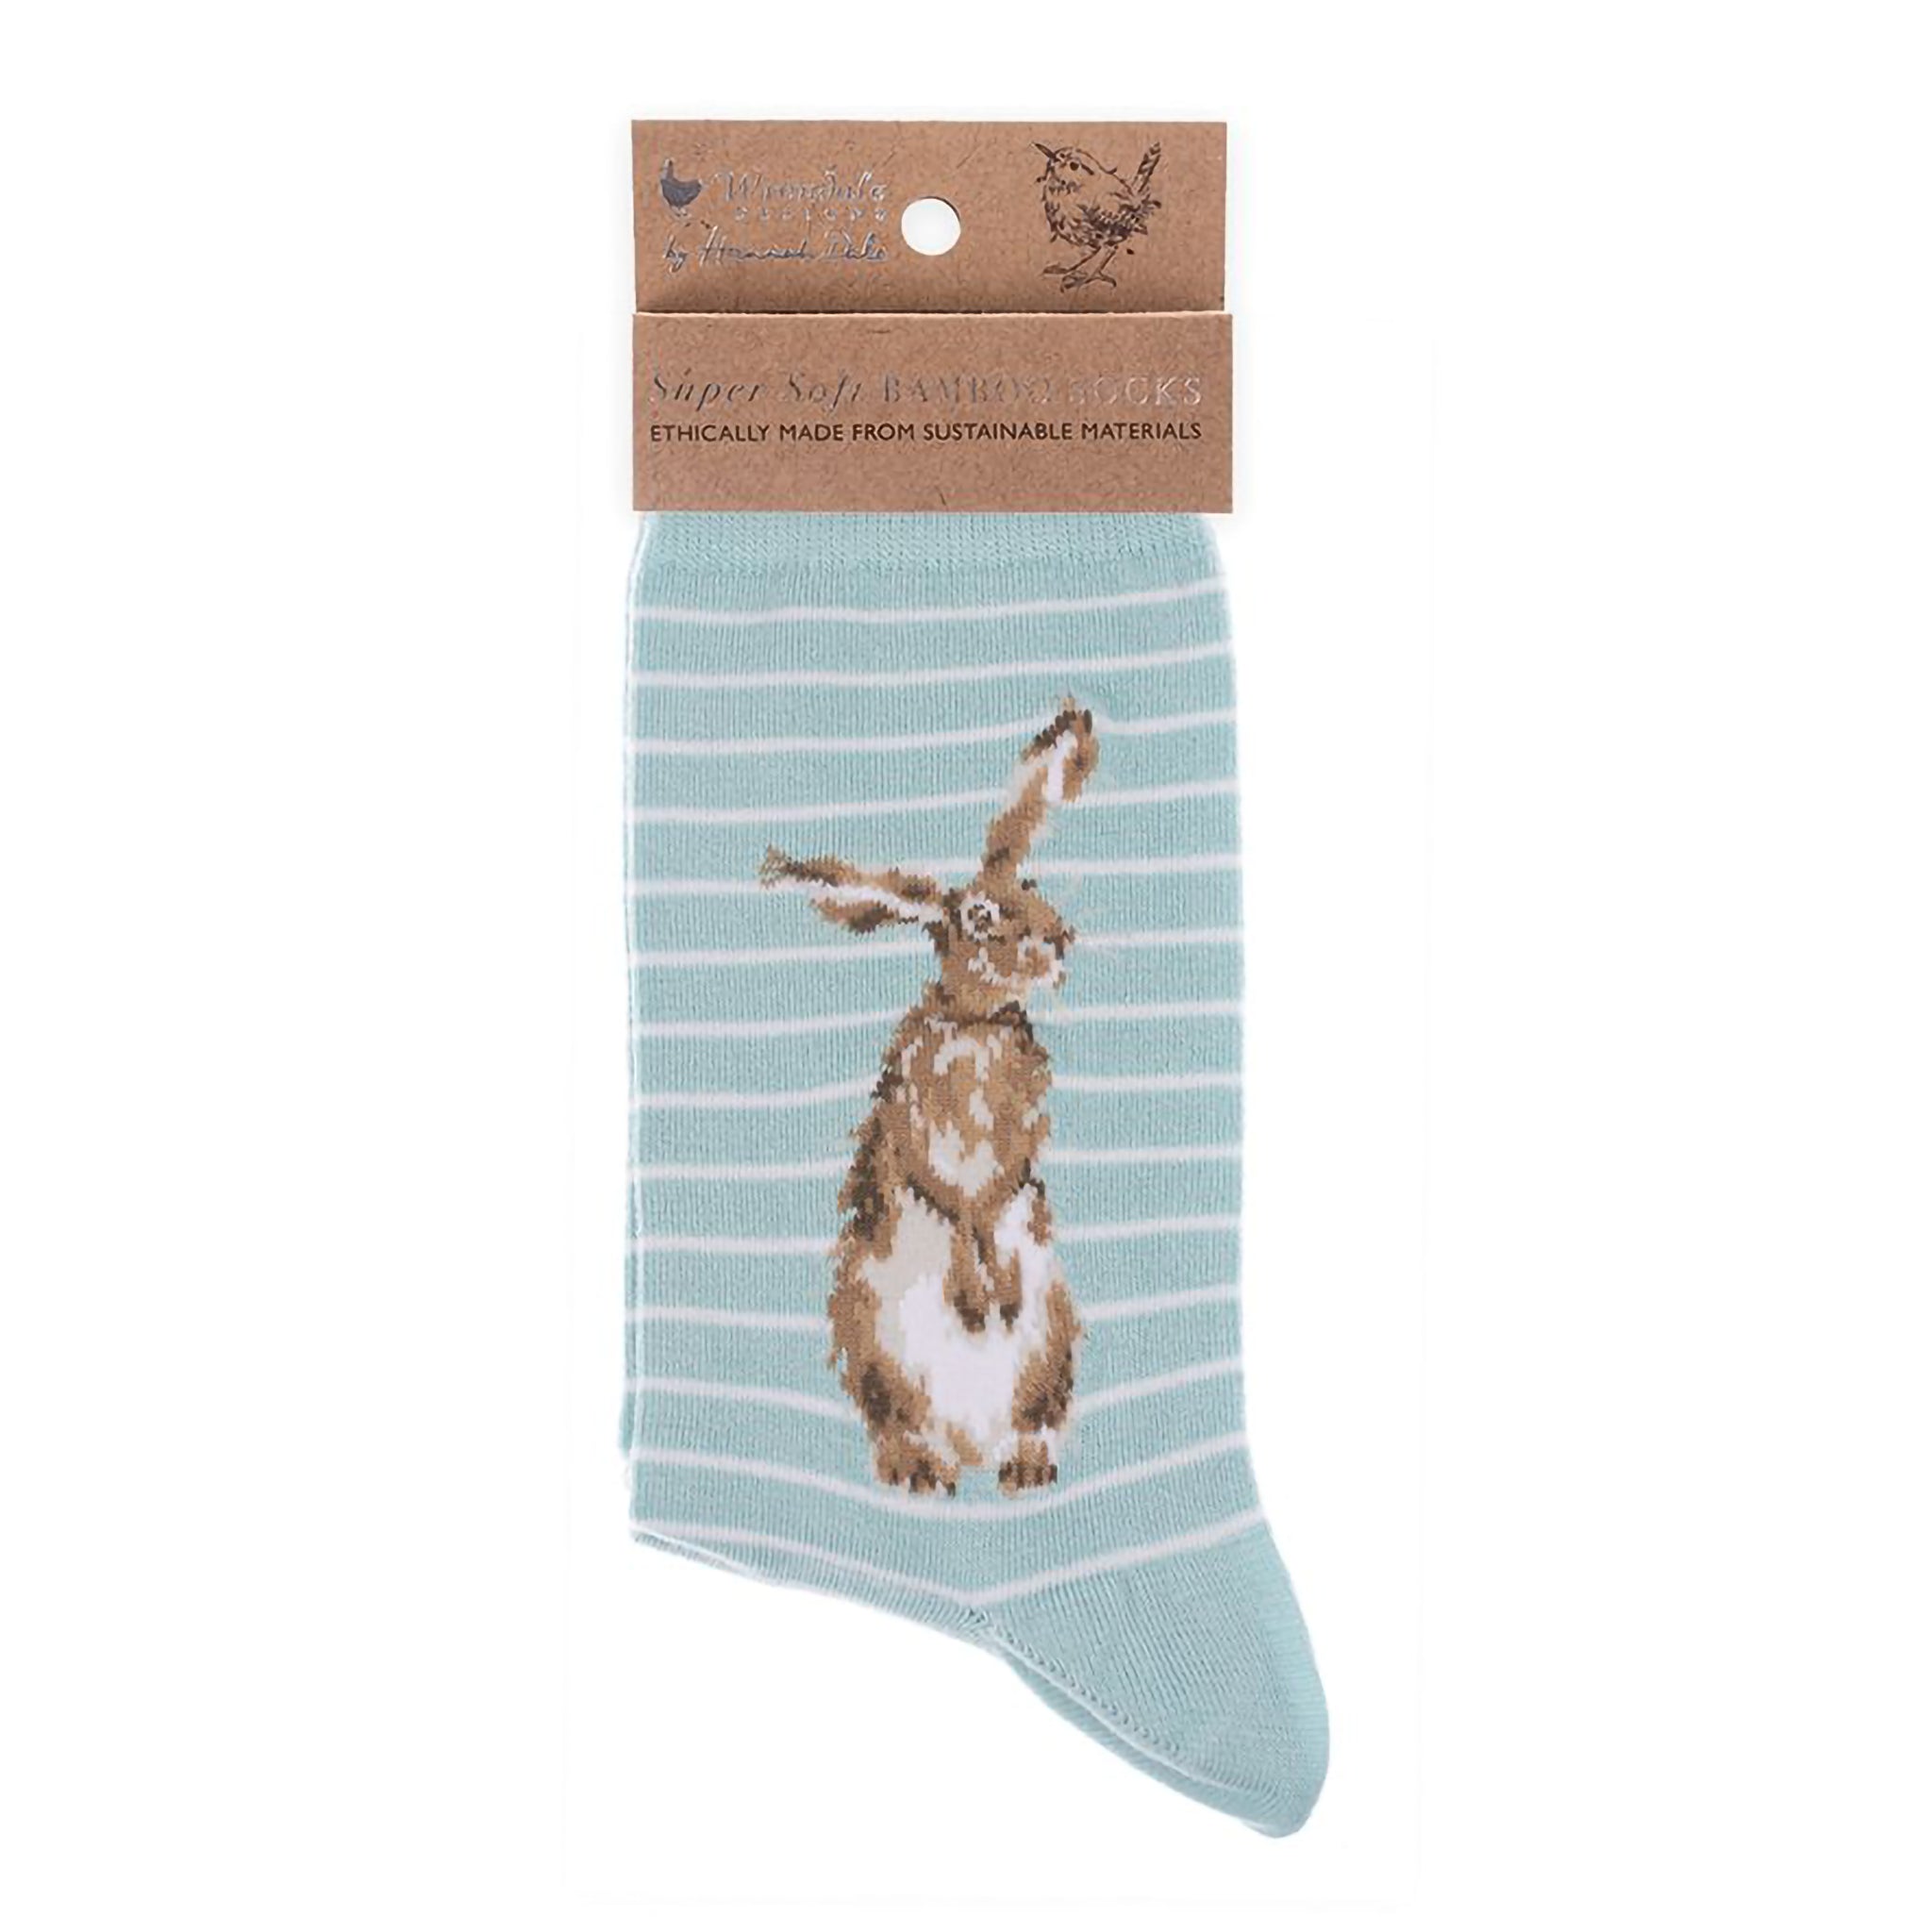 Folded pair of light duck egg blue socks with a hare picture and white stripes